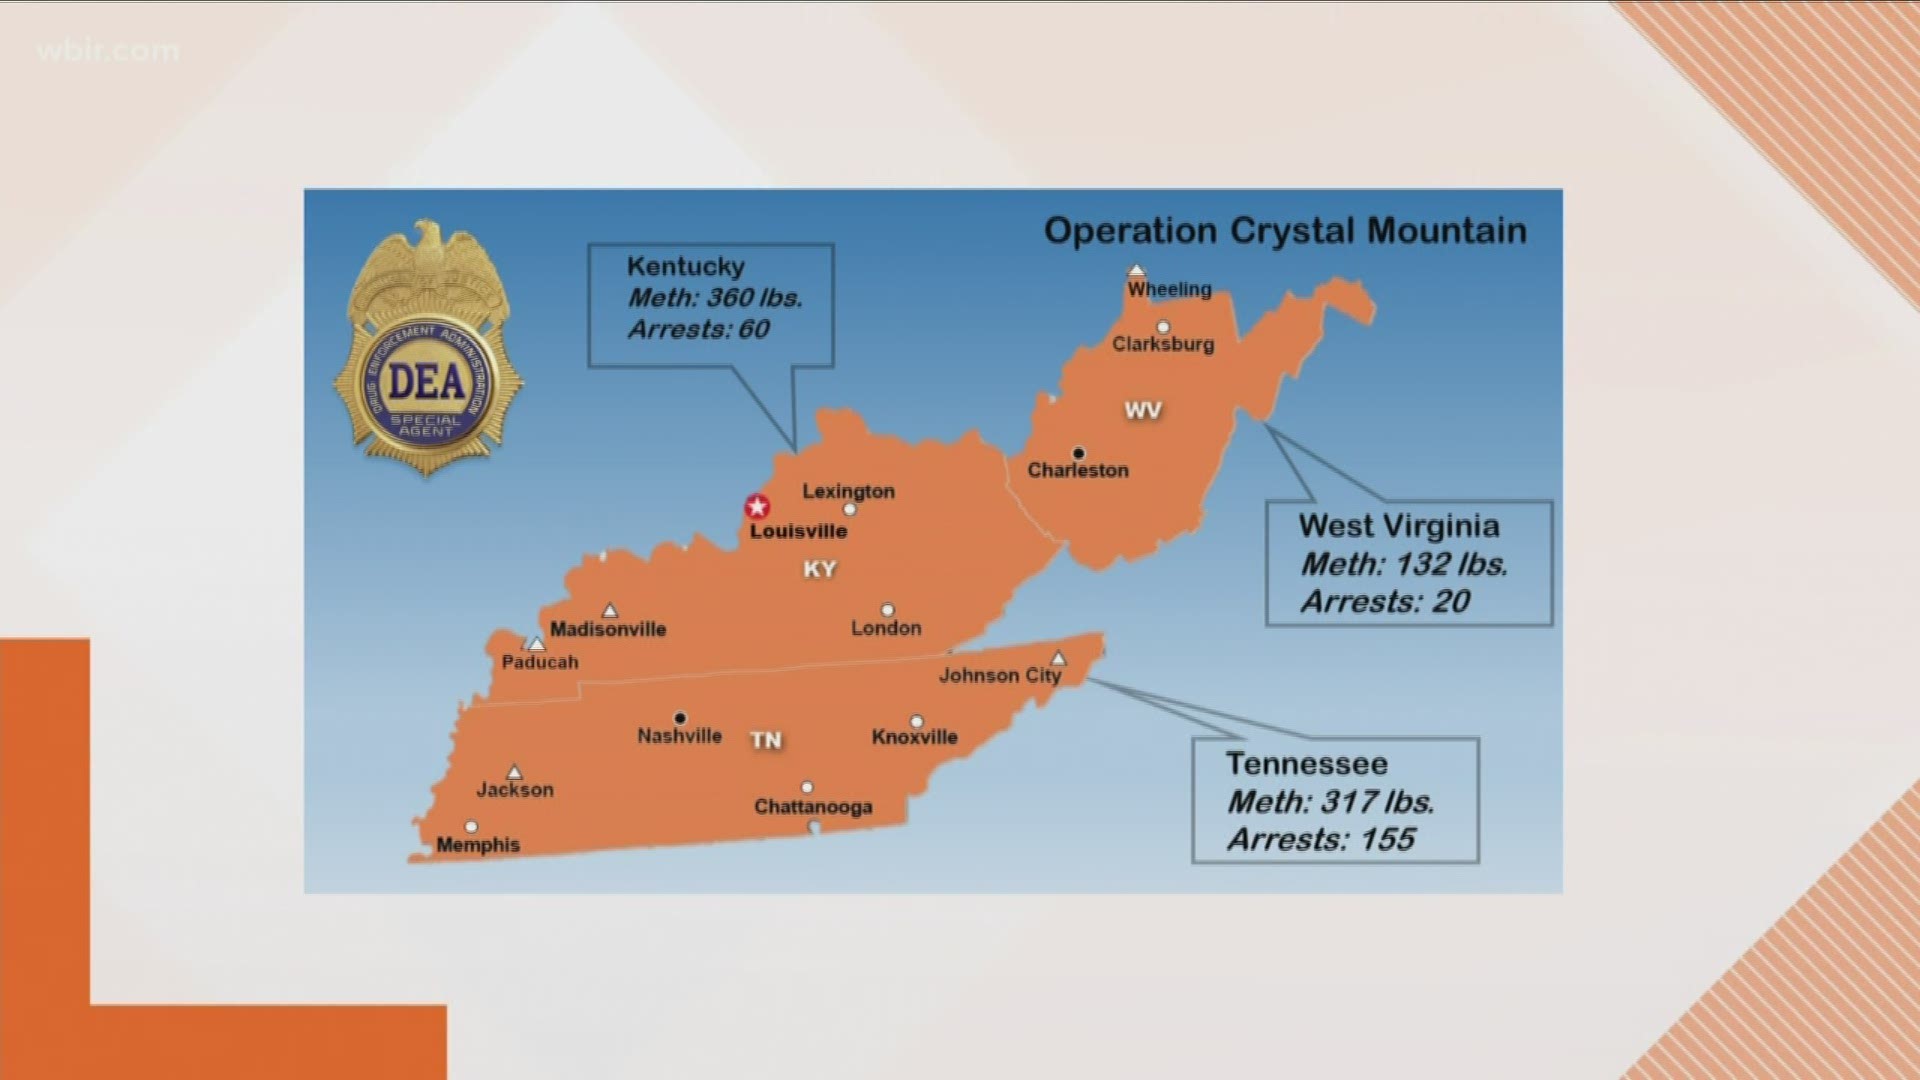 The US Drug Enforcement Administration said it targeted mexican drug cartels, drug trafficking organizations and other individuals in Kentucky, Tennessee and West Virginia. The DEA called the initiative "Operation Crystal Mountain."